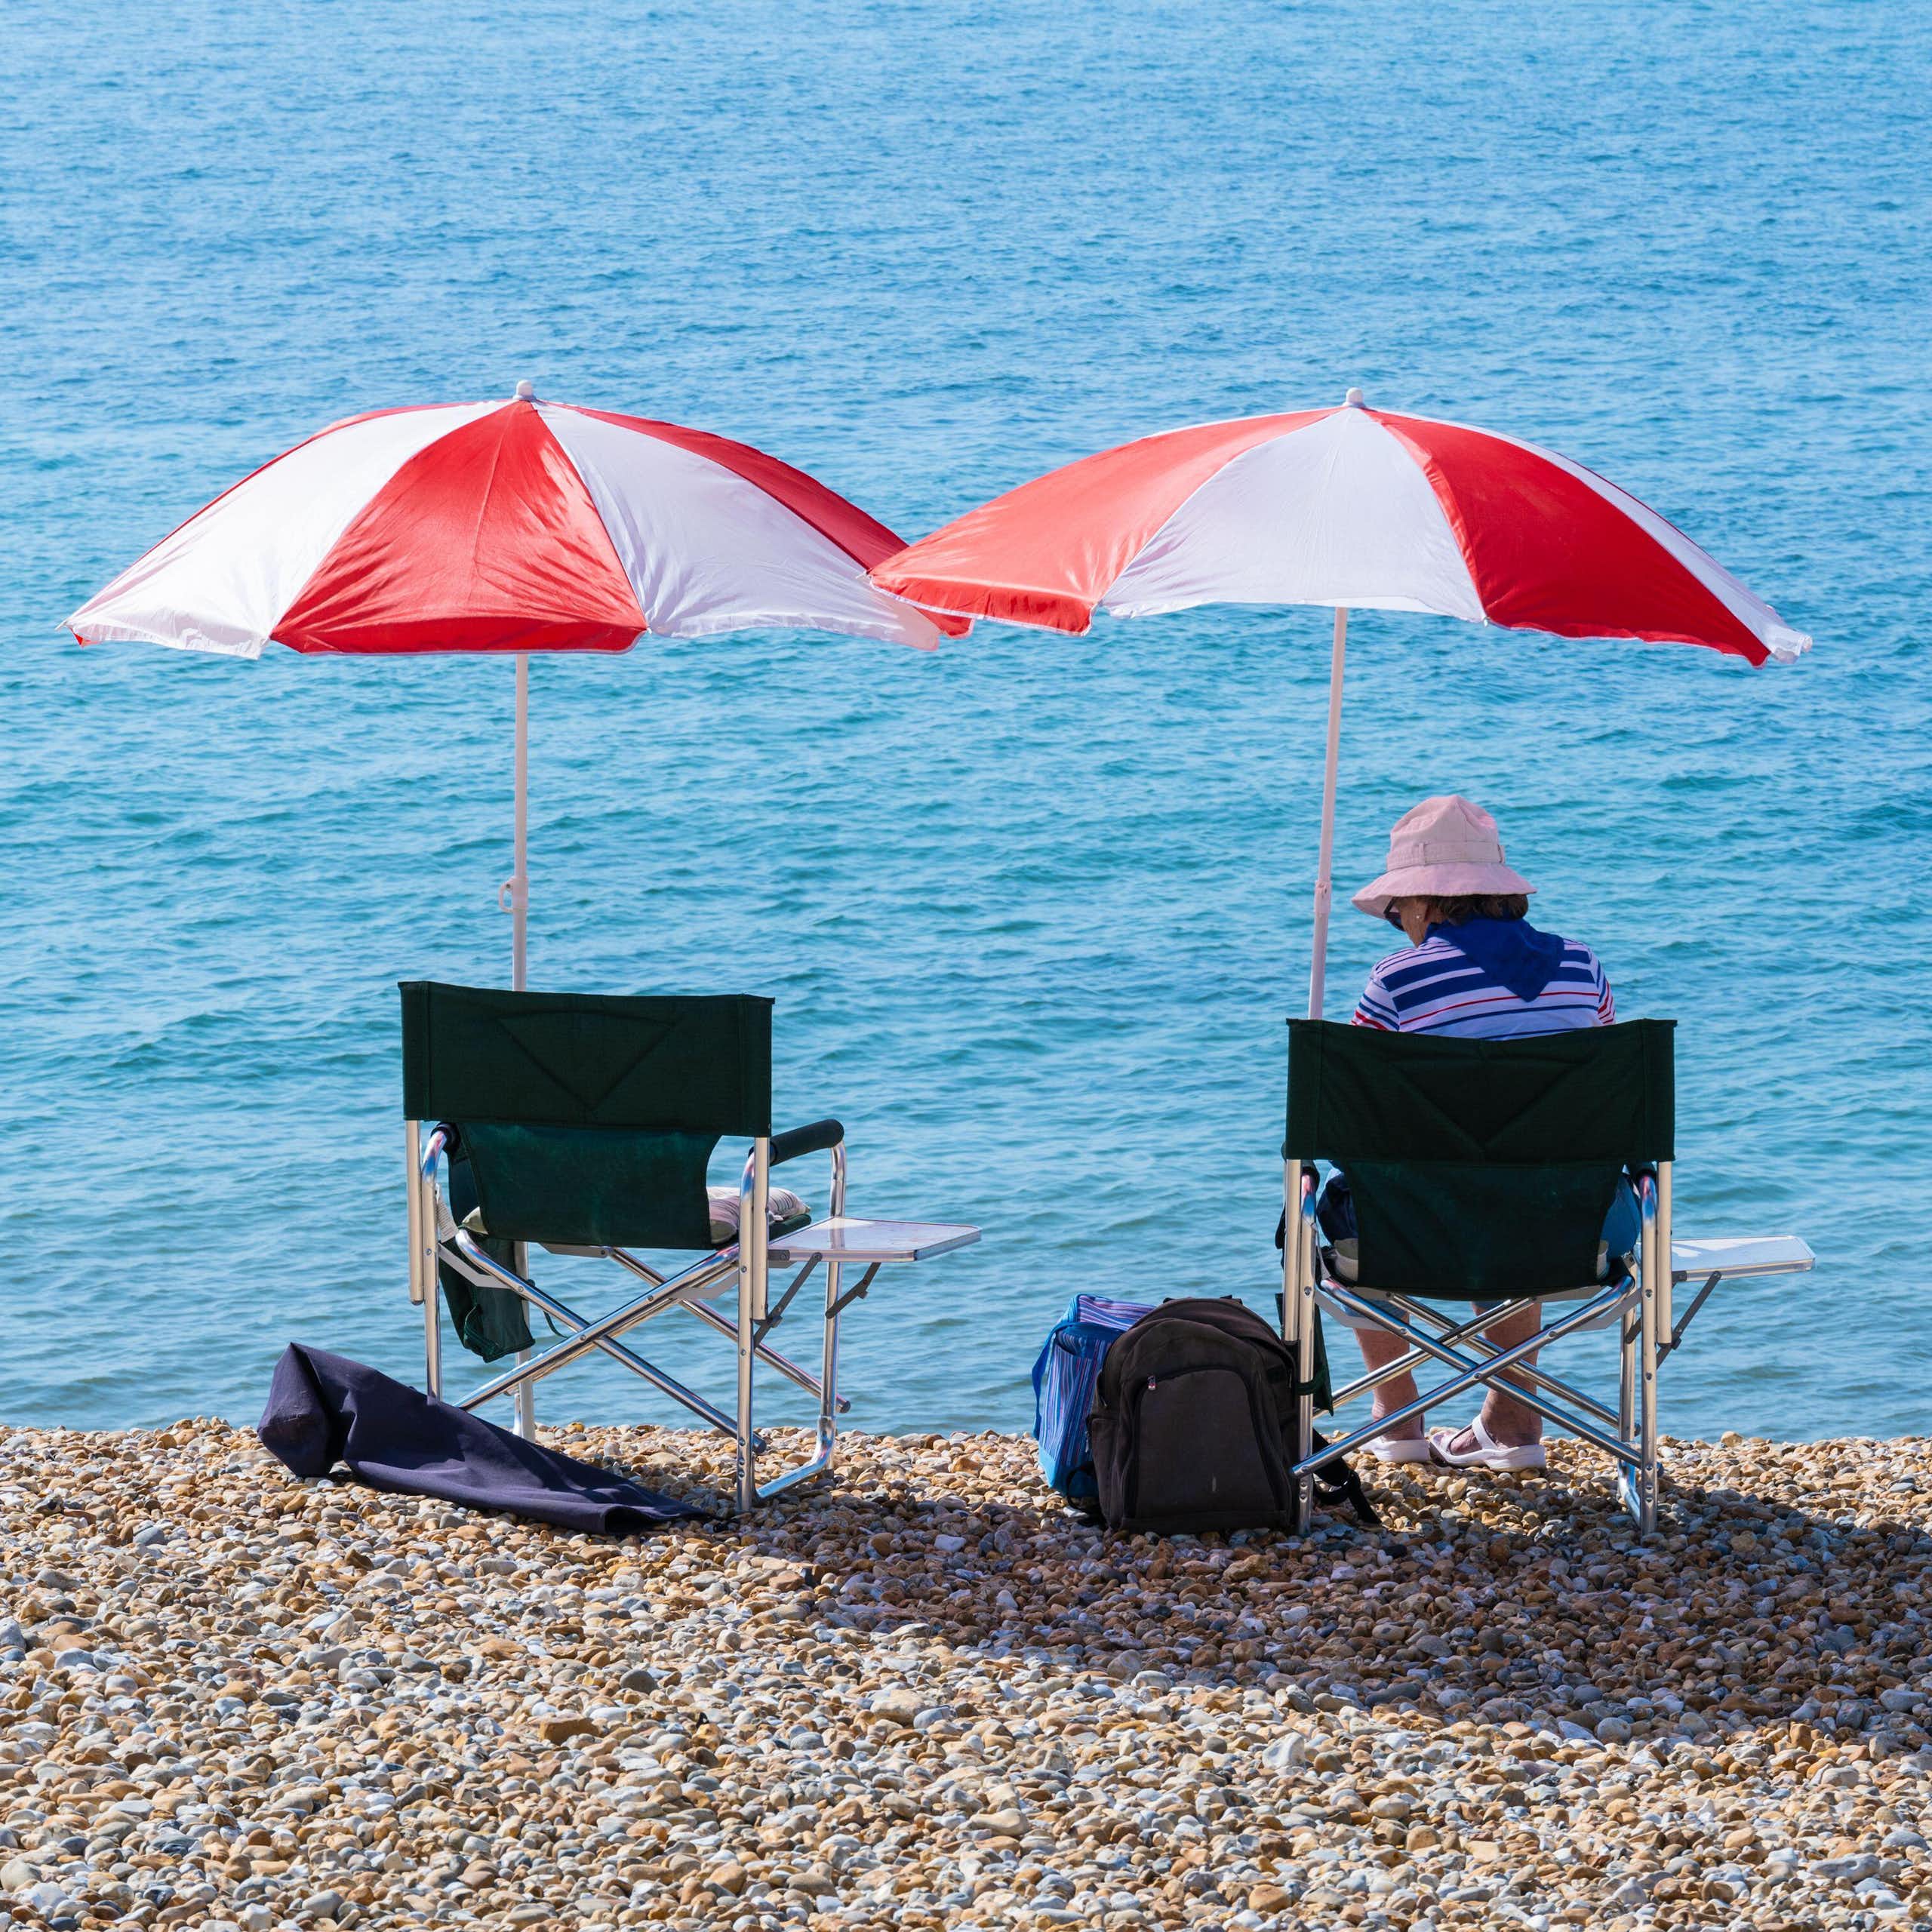 A person sitting on a pebbled beach with a red and white umbrella overhead